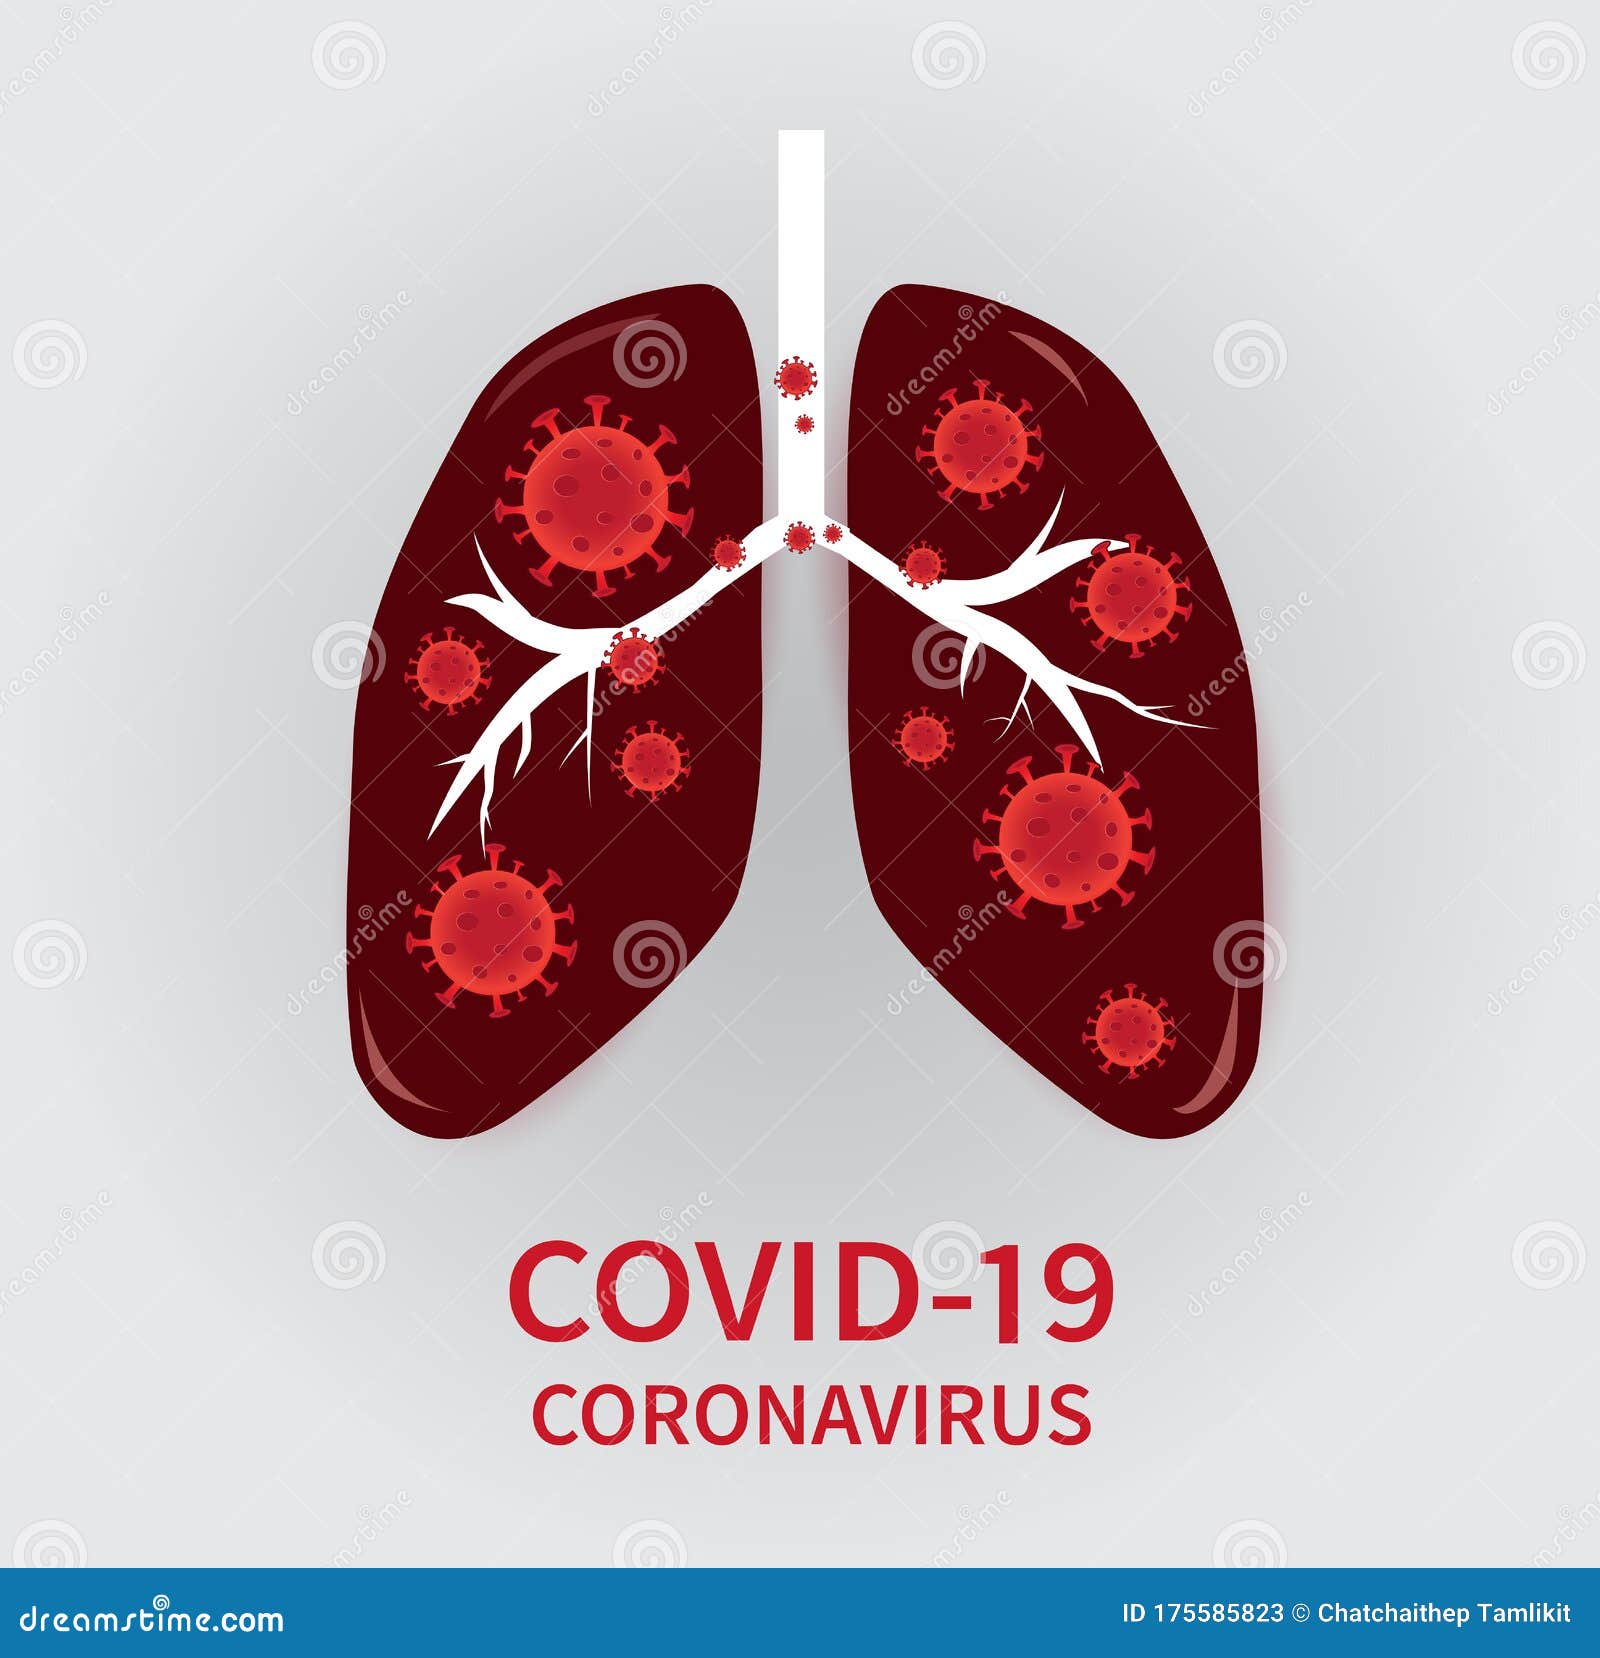 coronavirus covid-19 to spread into the cells of the airways and lungs.